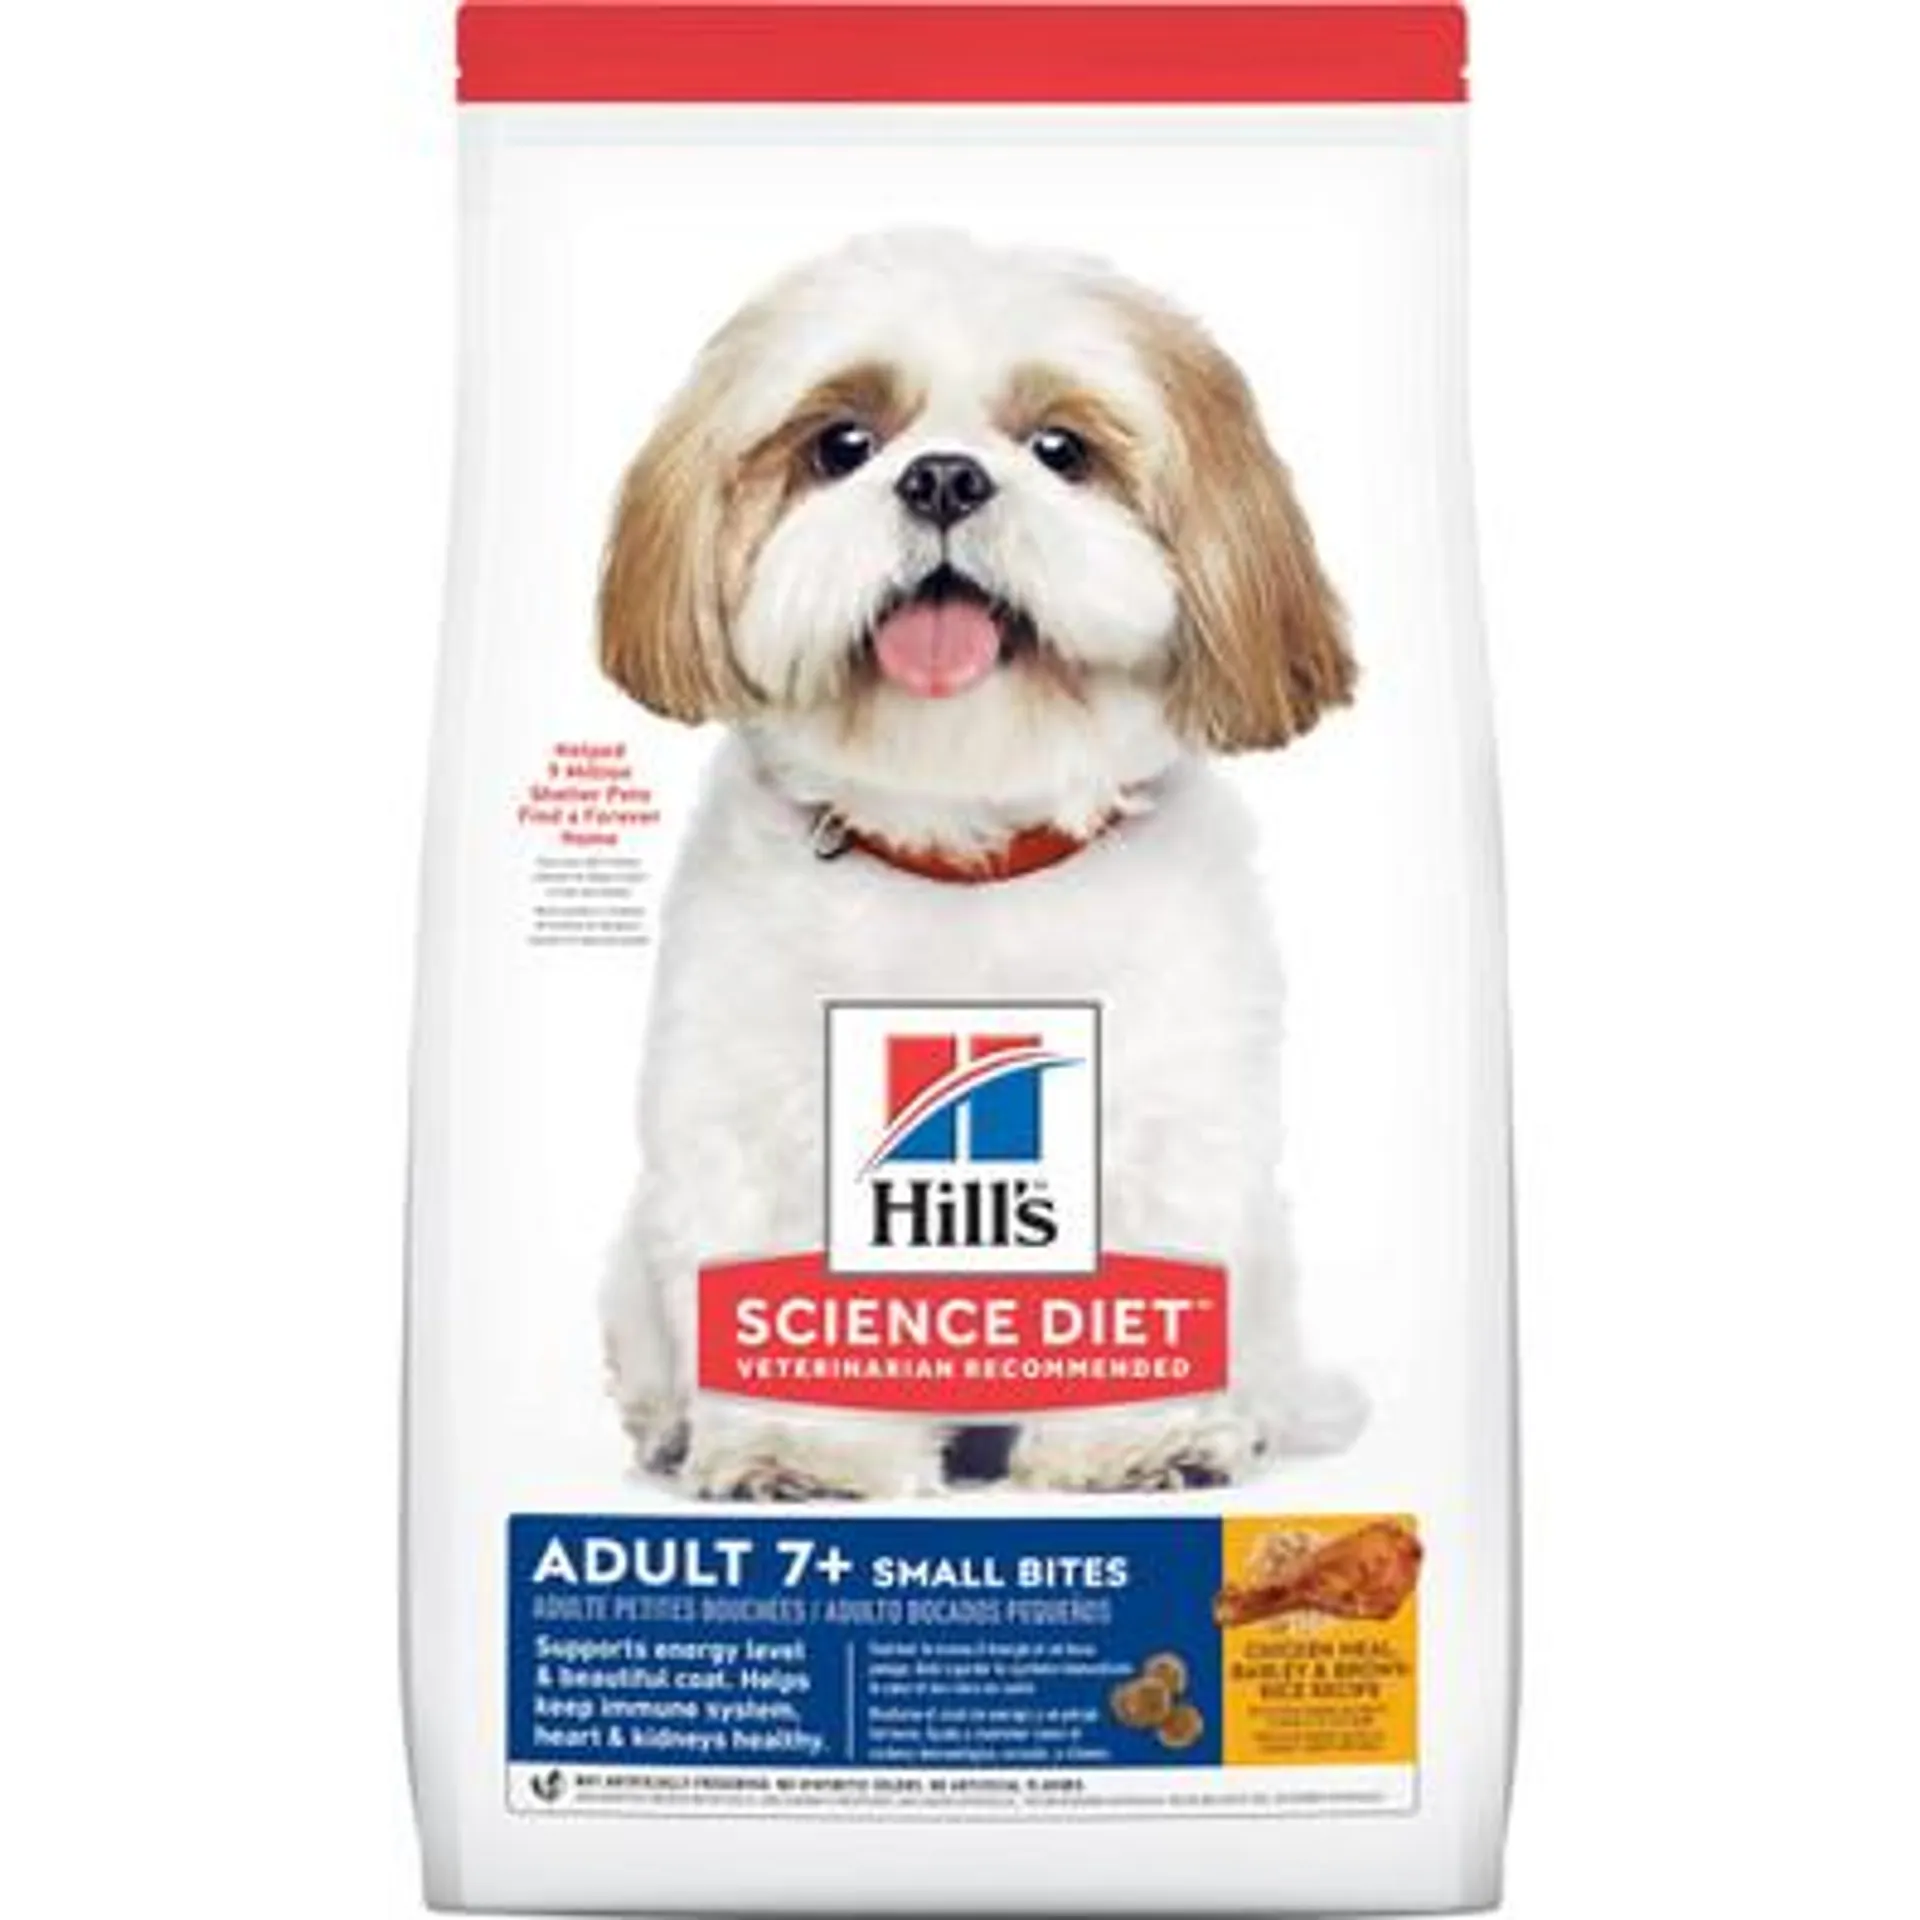 Hill's Science Diet Small Bites Senior Adult 7+ Dry Dog Food